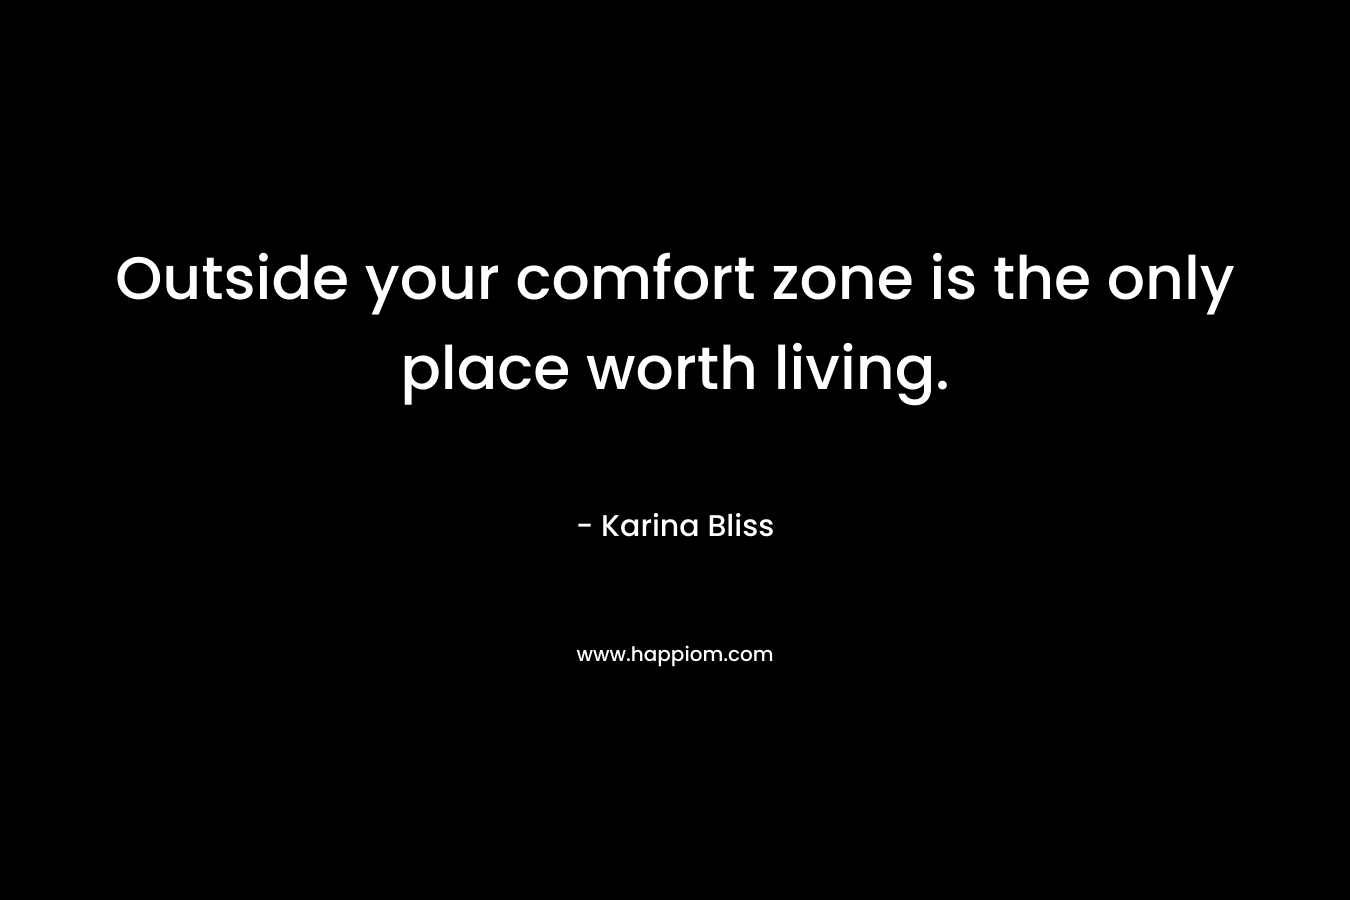 Outside your comfort zone is the only place worth living.